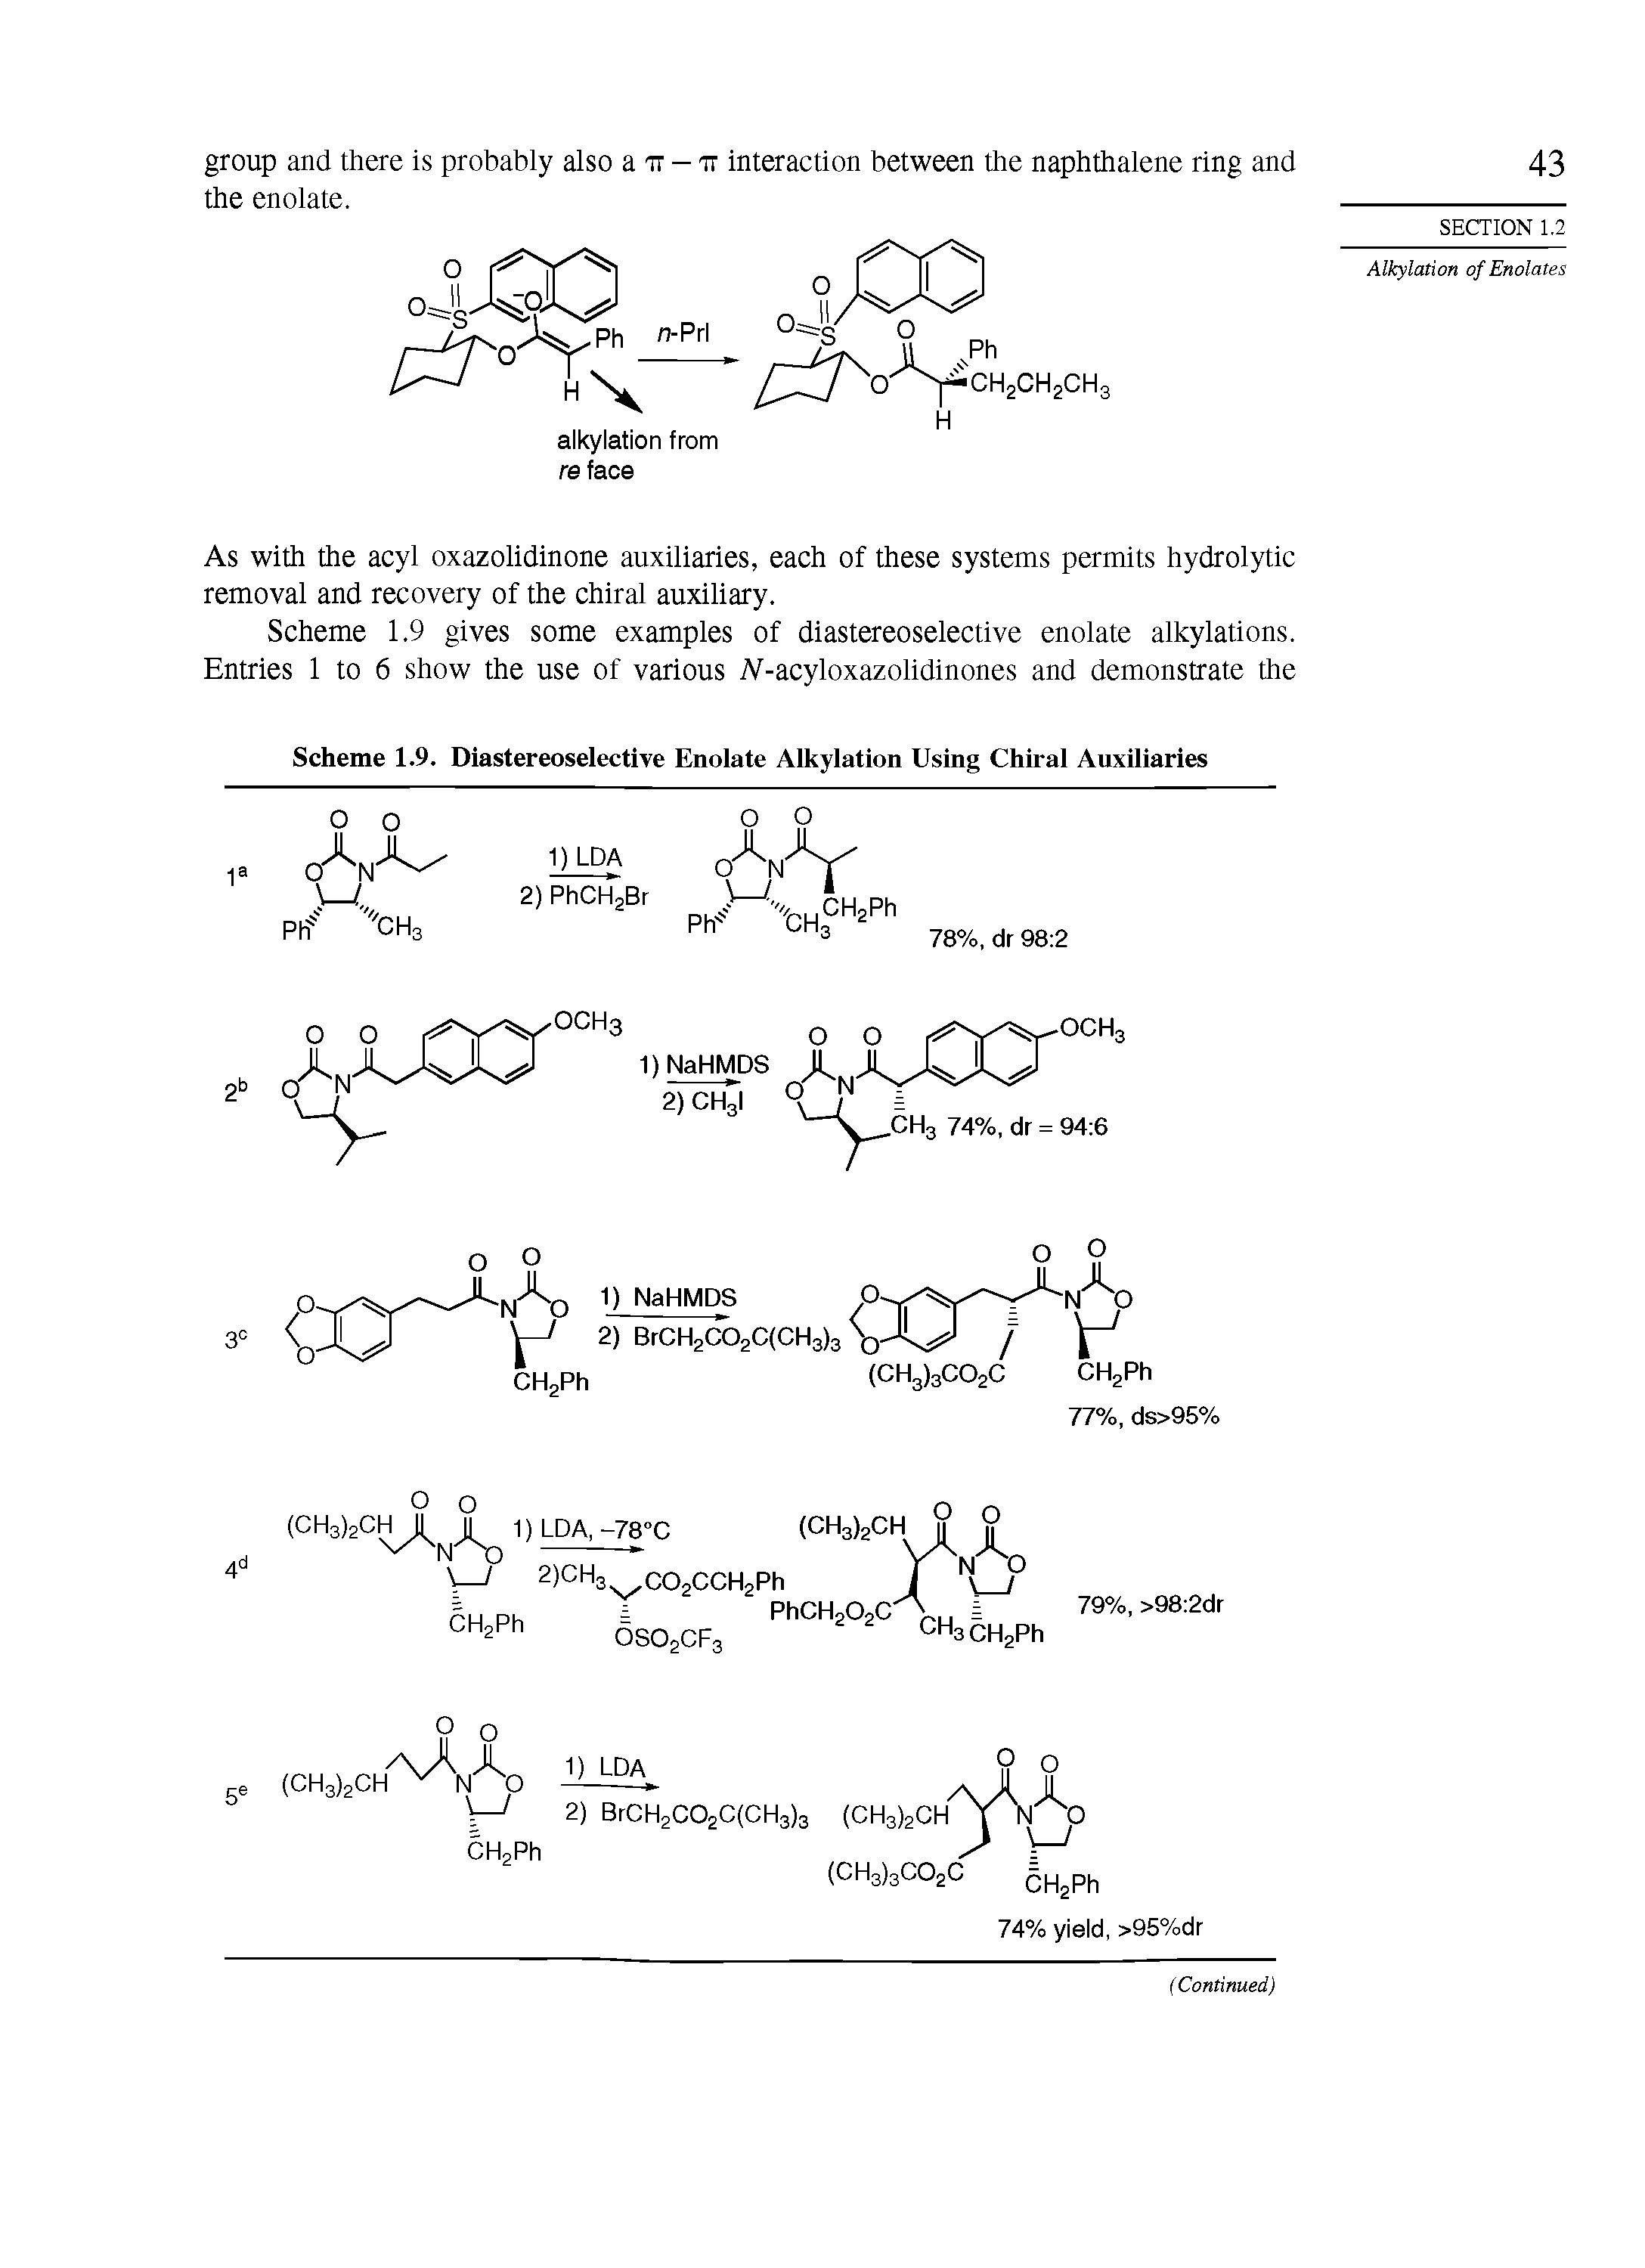 Scheme 1.9. Diastereoselective Enolate Alkylation Using Chiral Auxiliaries...